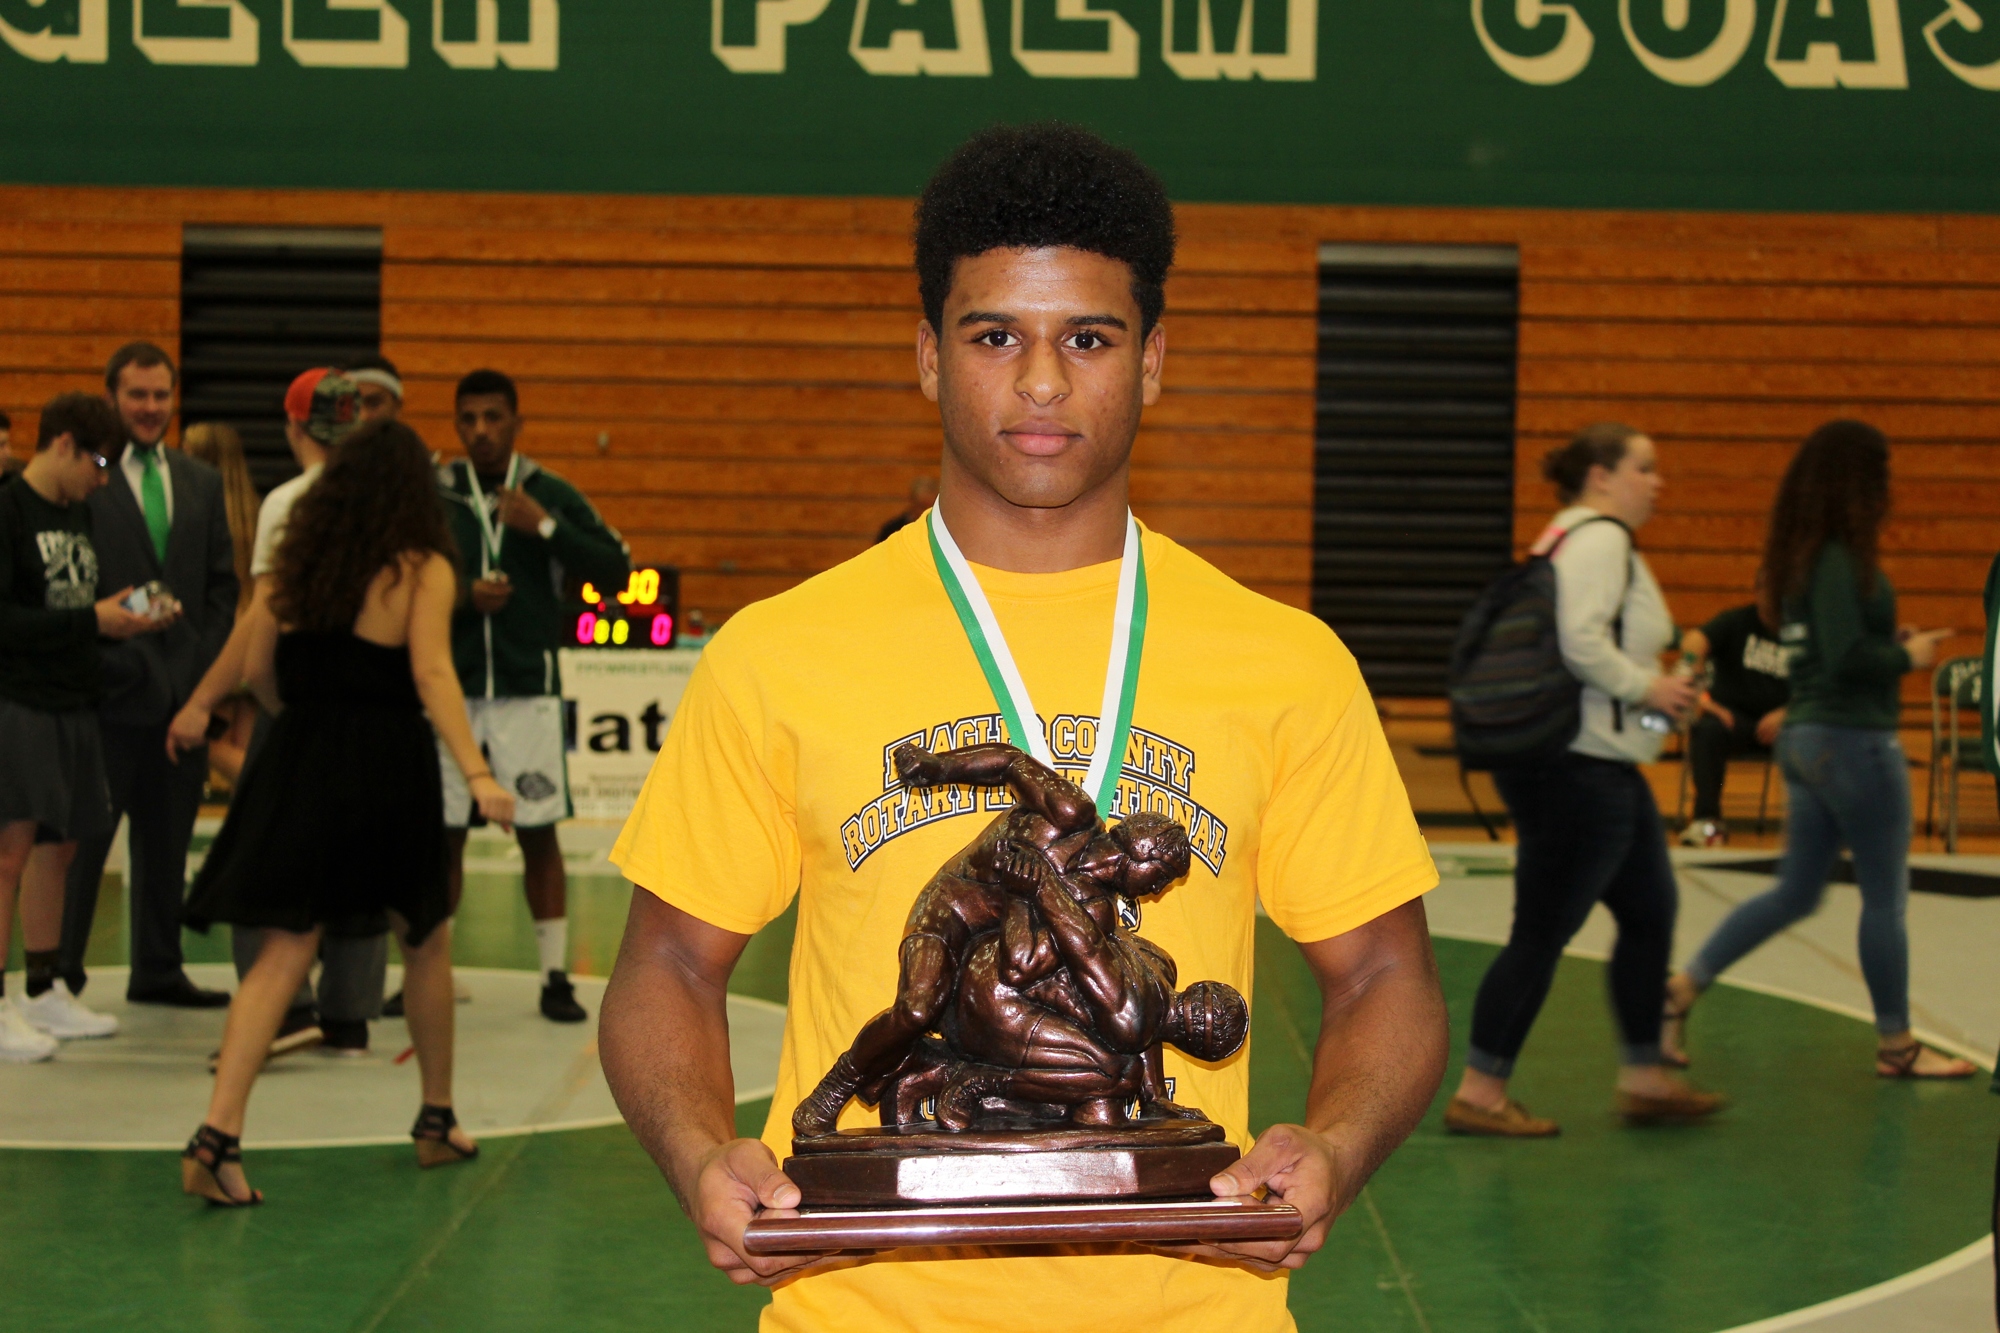 Kaz Maia won the Rotary Outstanding Wrestler Award for his win over state champion James Nereim.